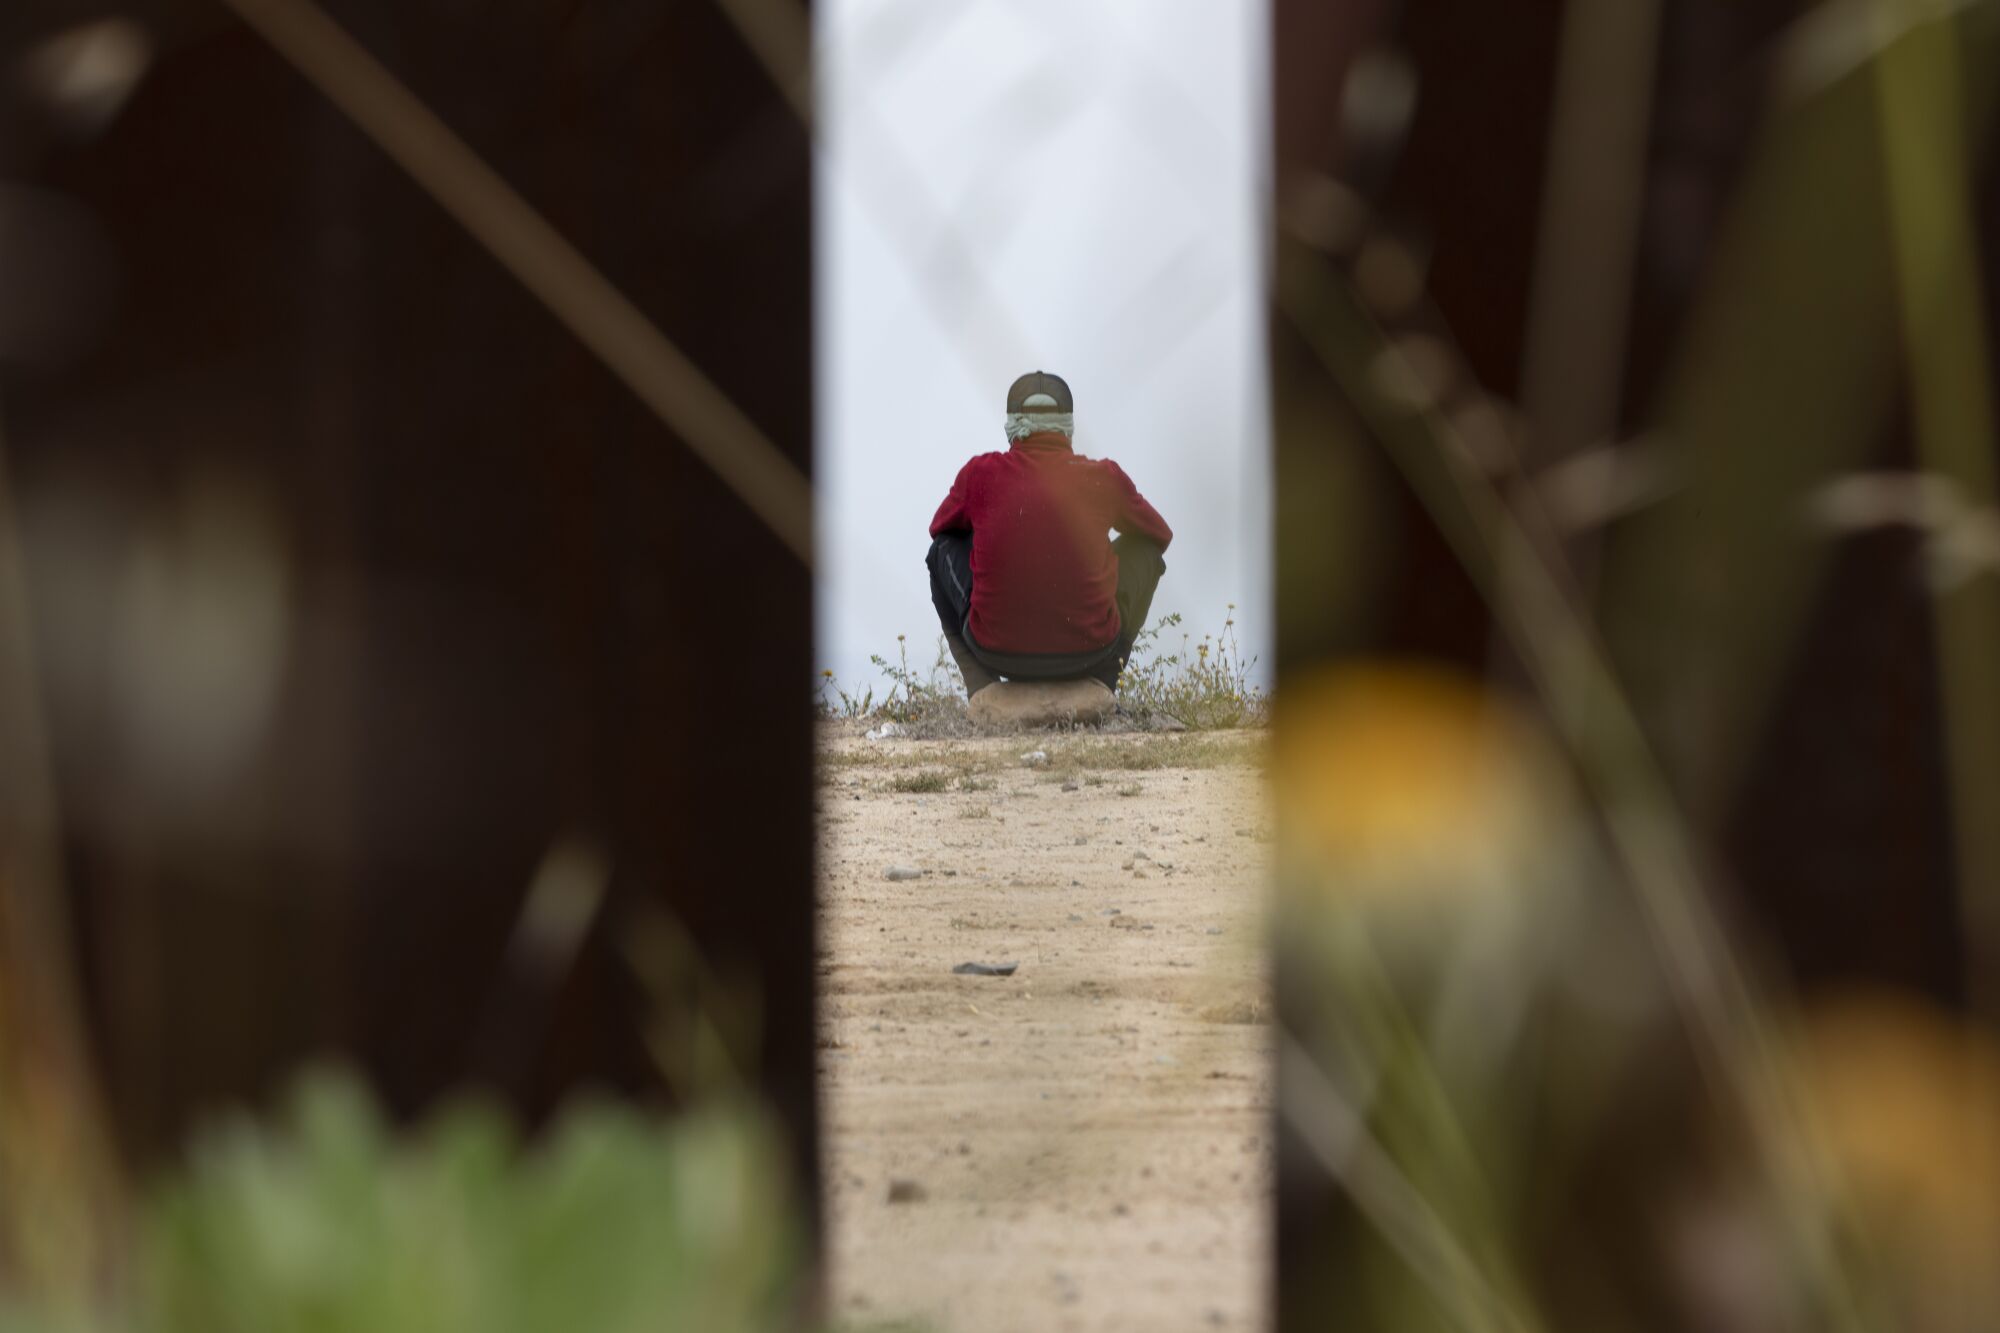 A man looks over to the United States as he waits between the border walls the day after Title 42 ended.